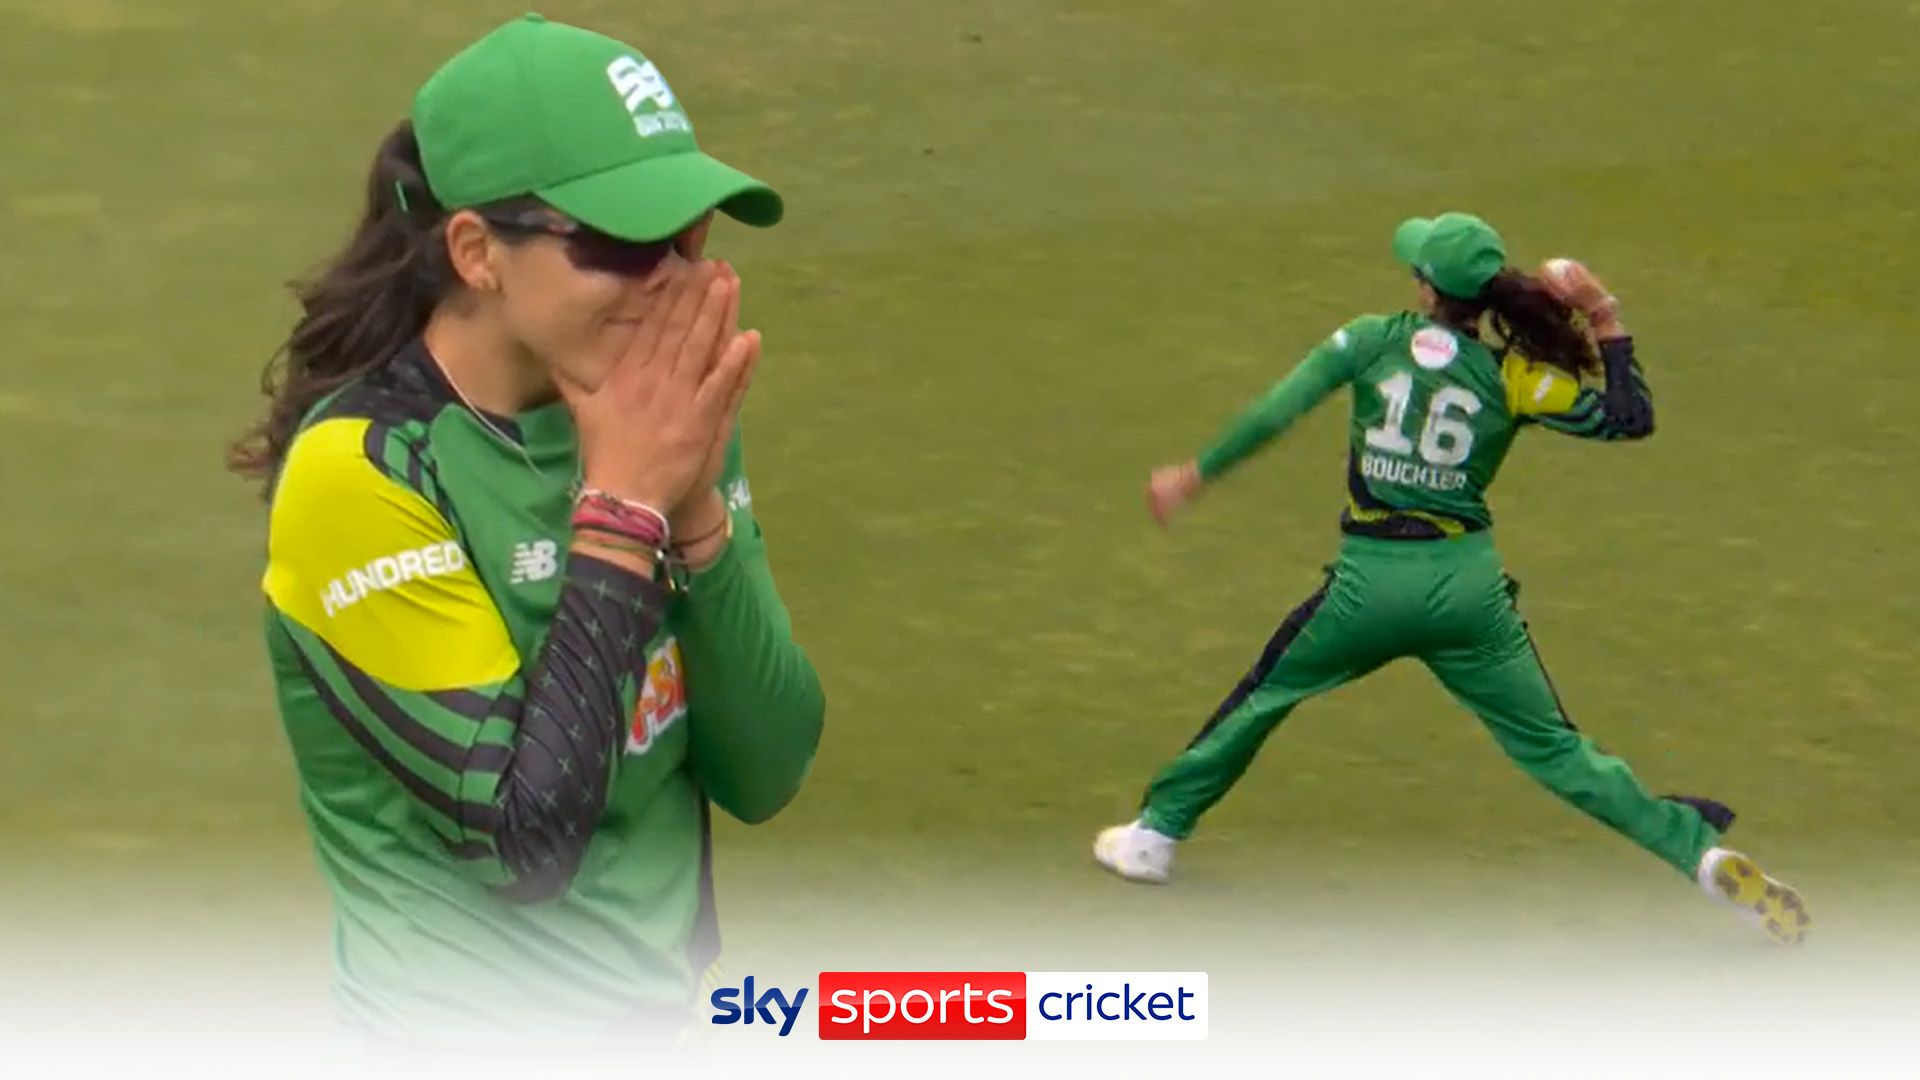 'A moment of brilliance!' | Bouchier produces run out just shy of boundary